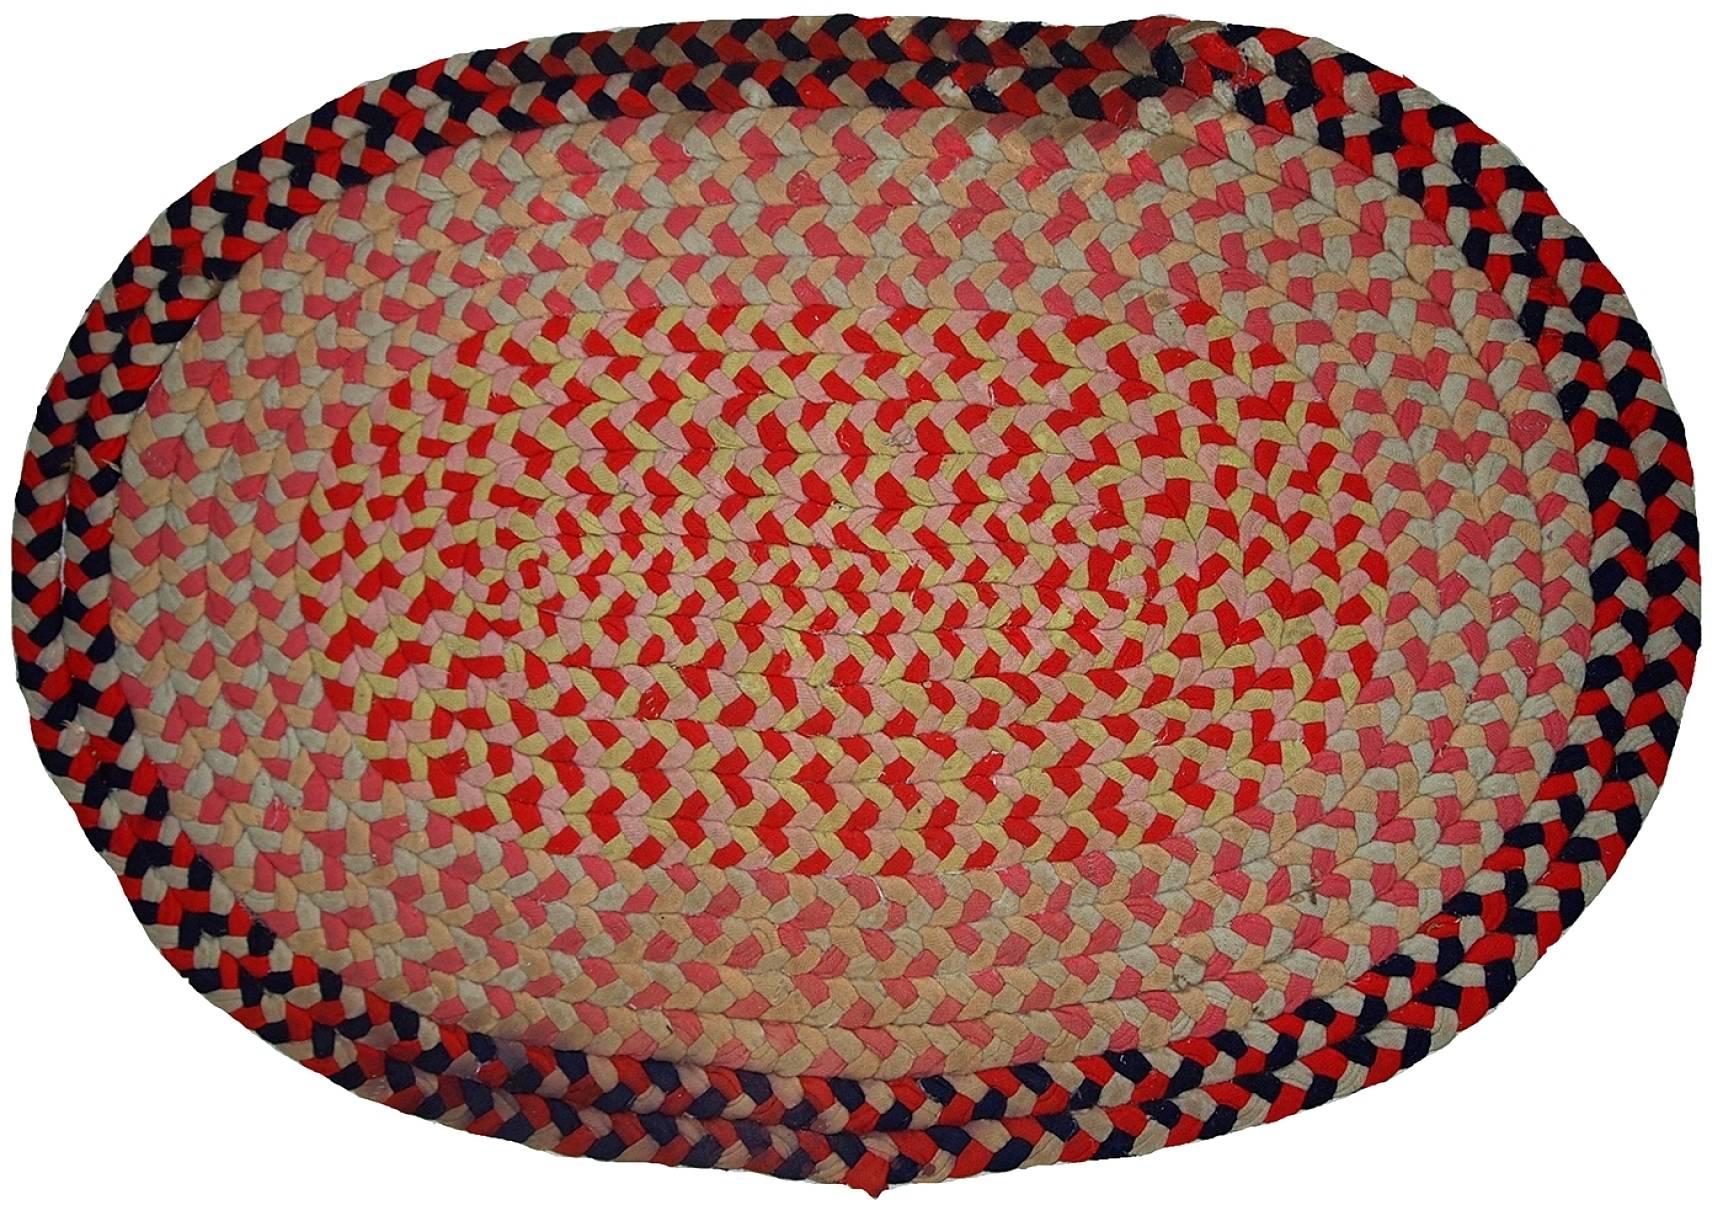 Antique handmade American Braided rug in oval shape. The rug made in cotton in red, navy and yellow shades. It has some age discolouration’s.
 